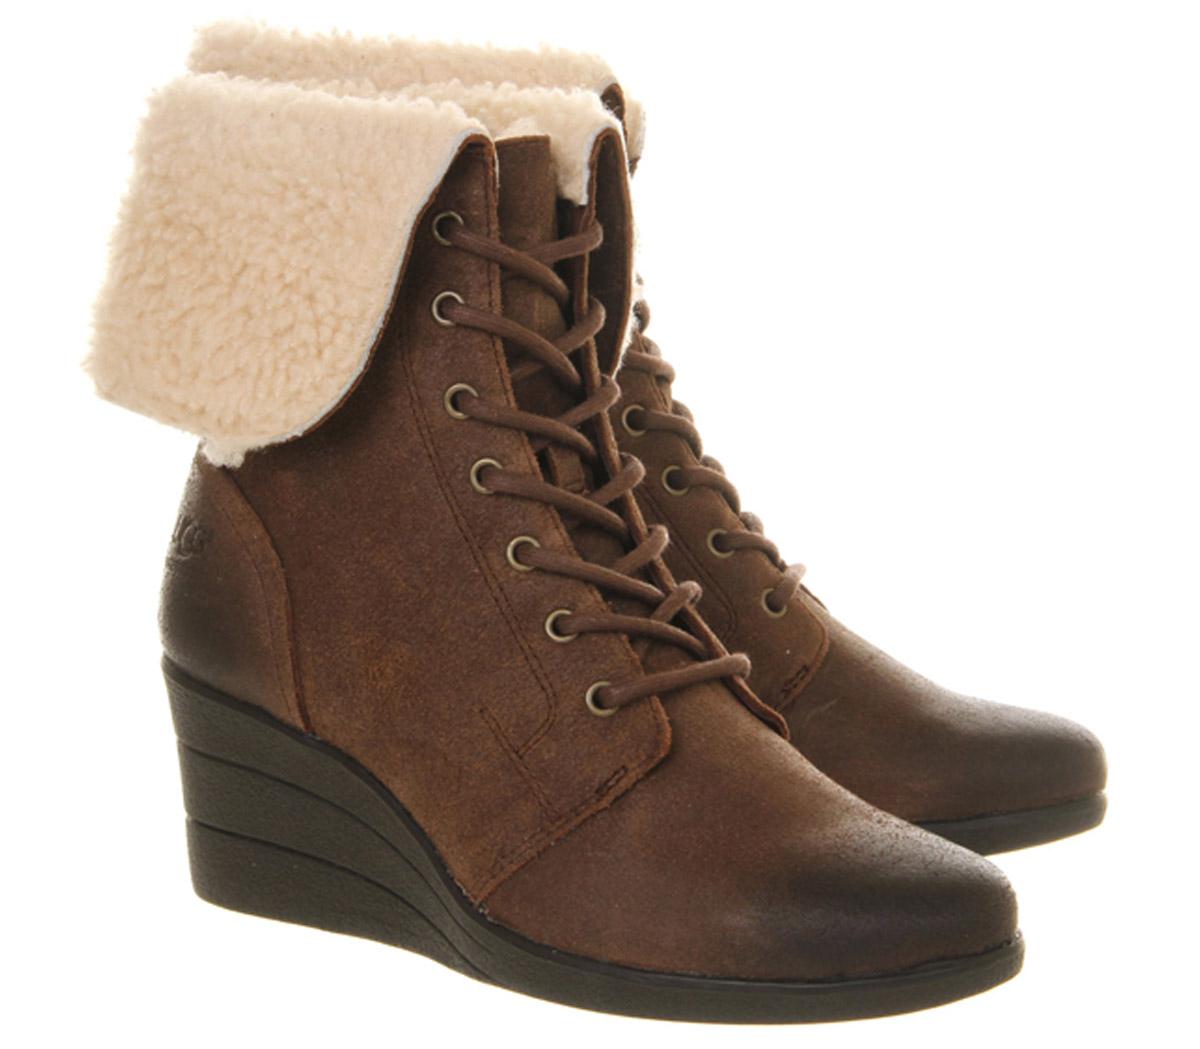 Lyst - Ugg Zea Shearling Wedge Lace Up Boots in Brown